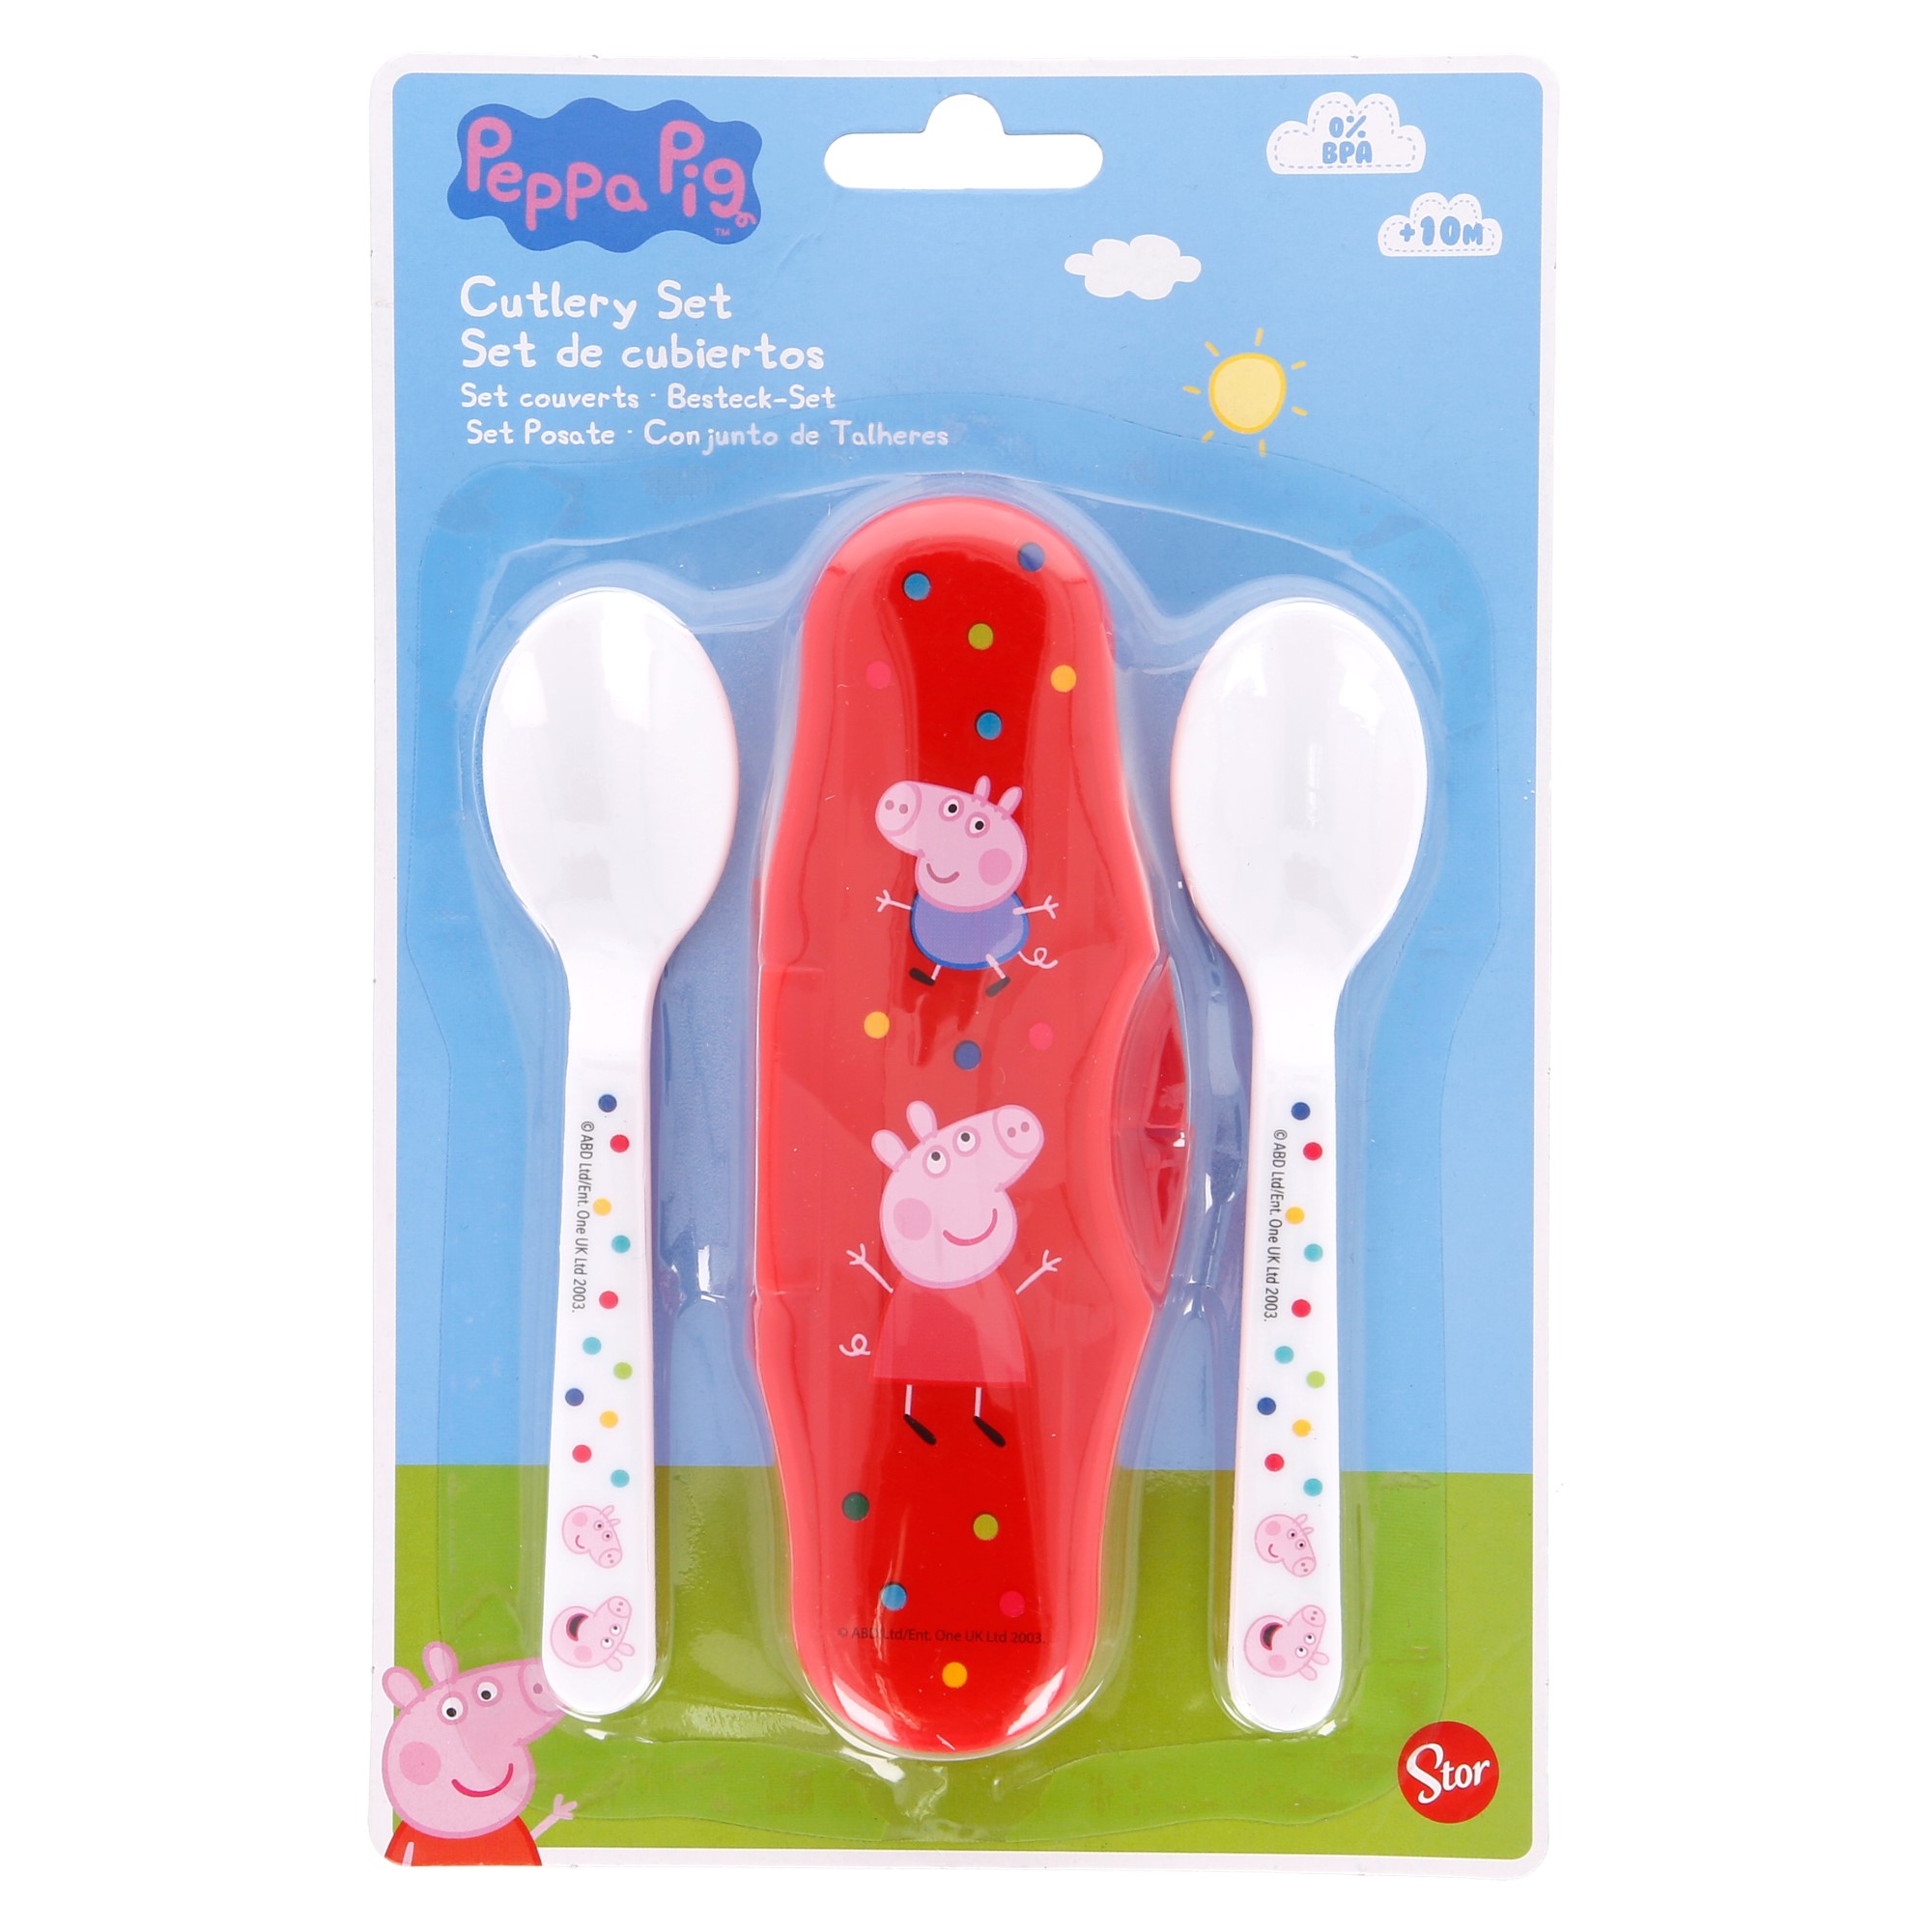 Set of 2 Spoons for Children from +6 Months Bpa Free | Peppa Pig Little One 